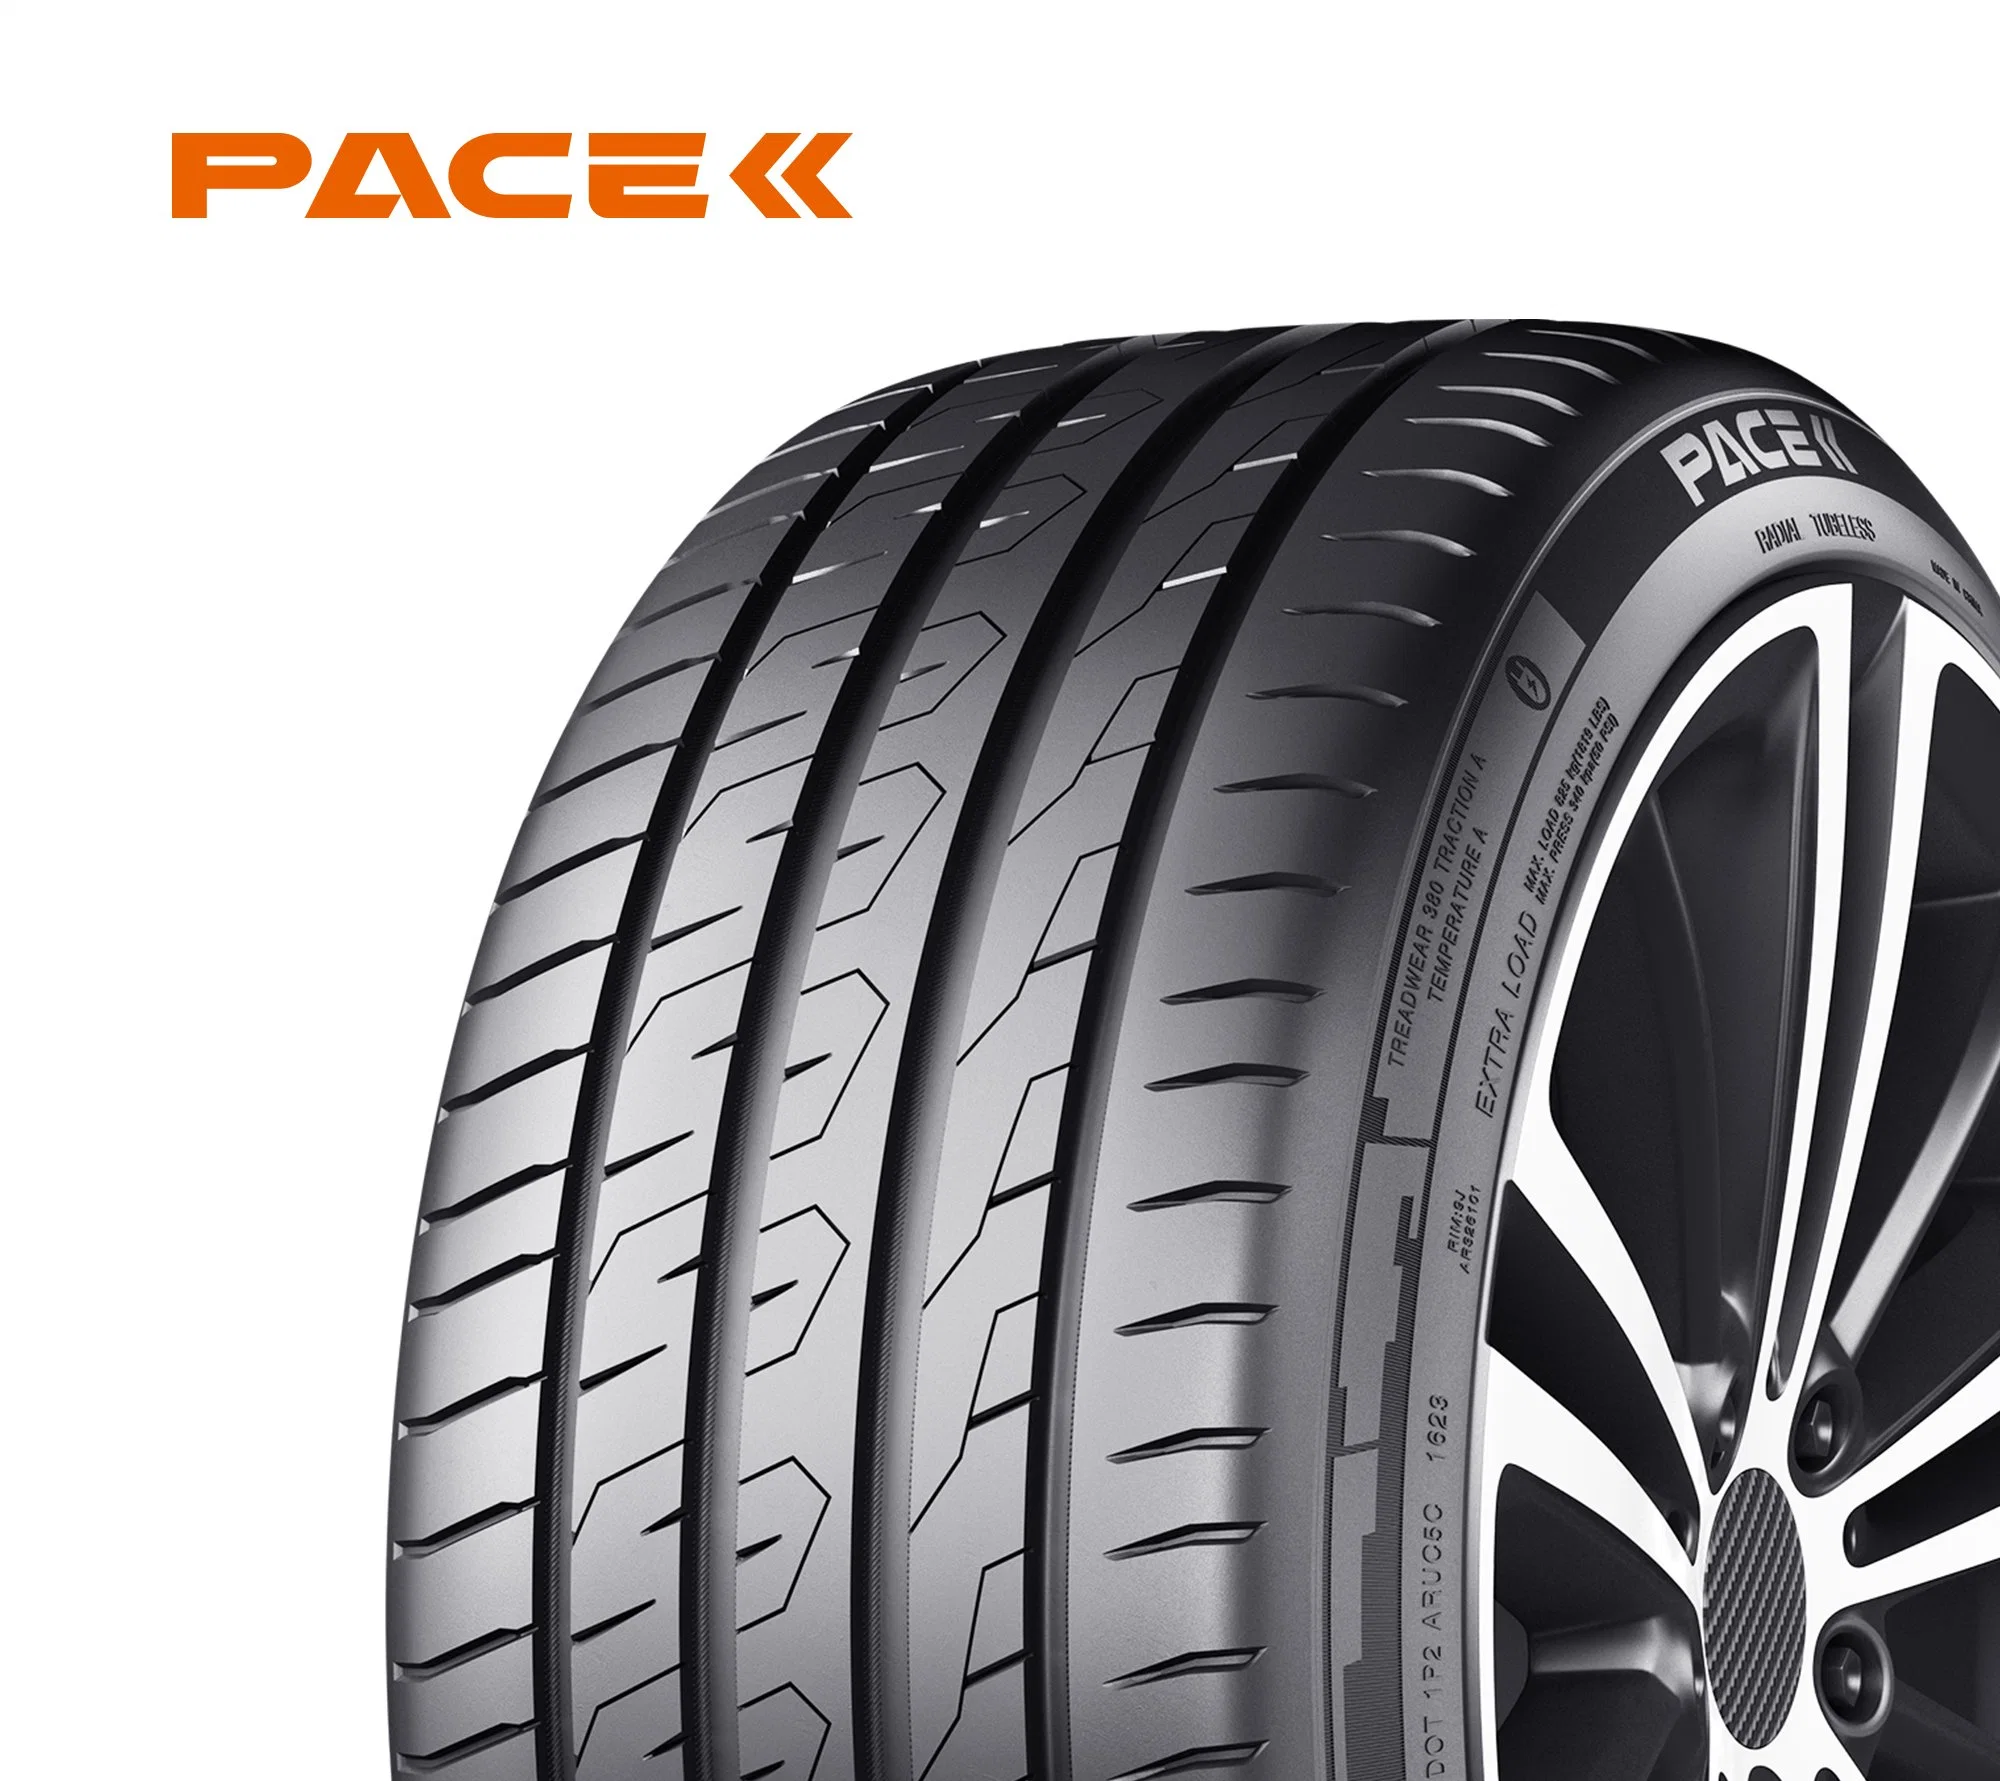 FACTORY Direct High Quality Pace Brand Artoria EV Tire/Electric Vehicle Tire/Electric Car Tire with 255/50zr20 +Размеры, сертификаты и быстрая поставка